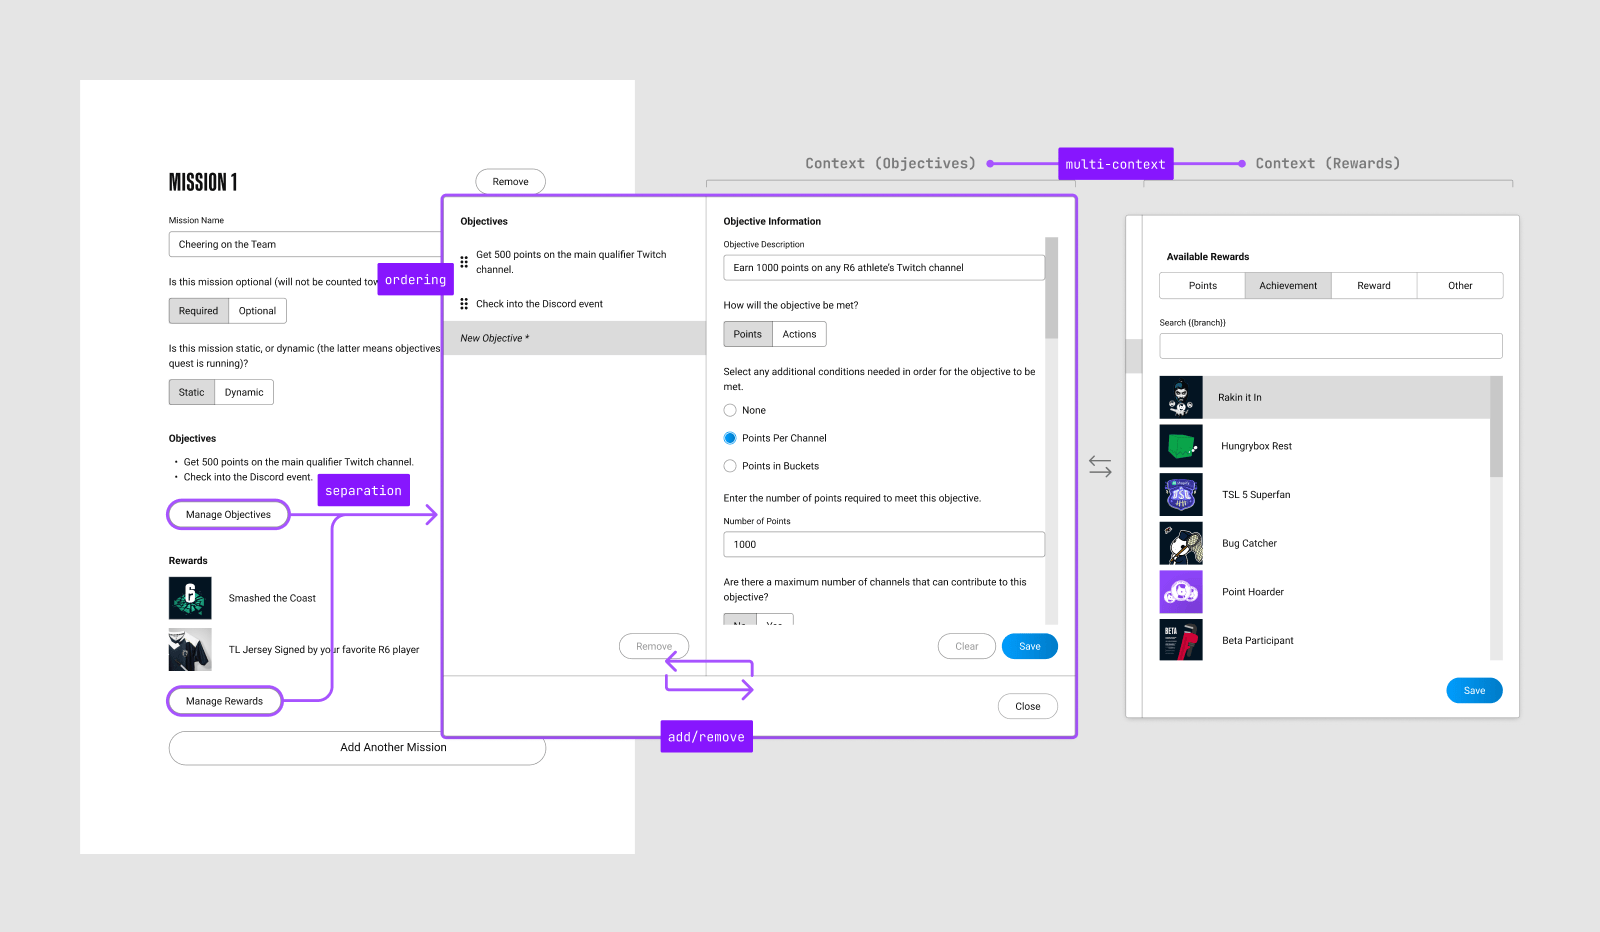 The user experience around the Staging Dialog, showing how it could be used to separate, serialize, and manage specific kinds of content easily.